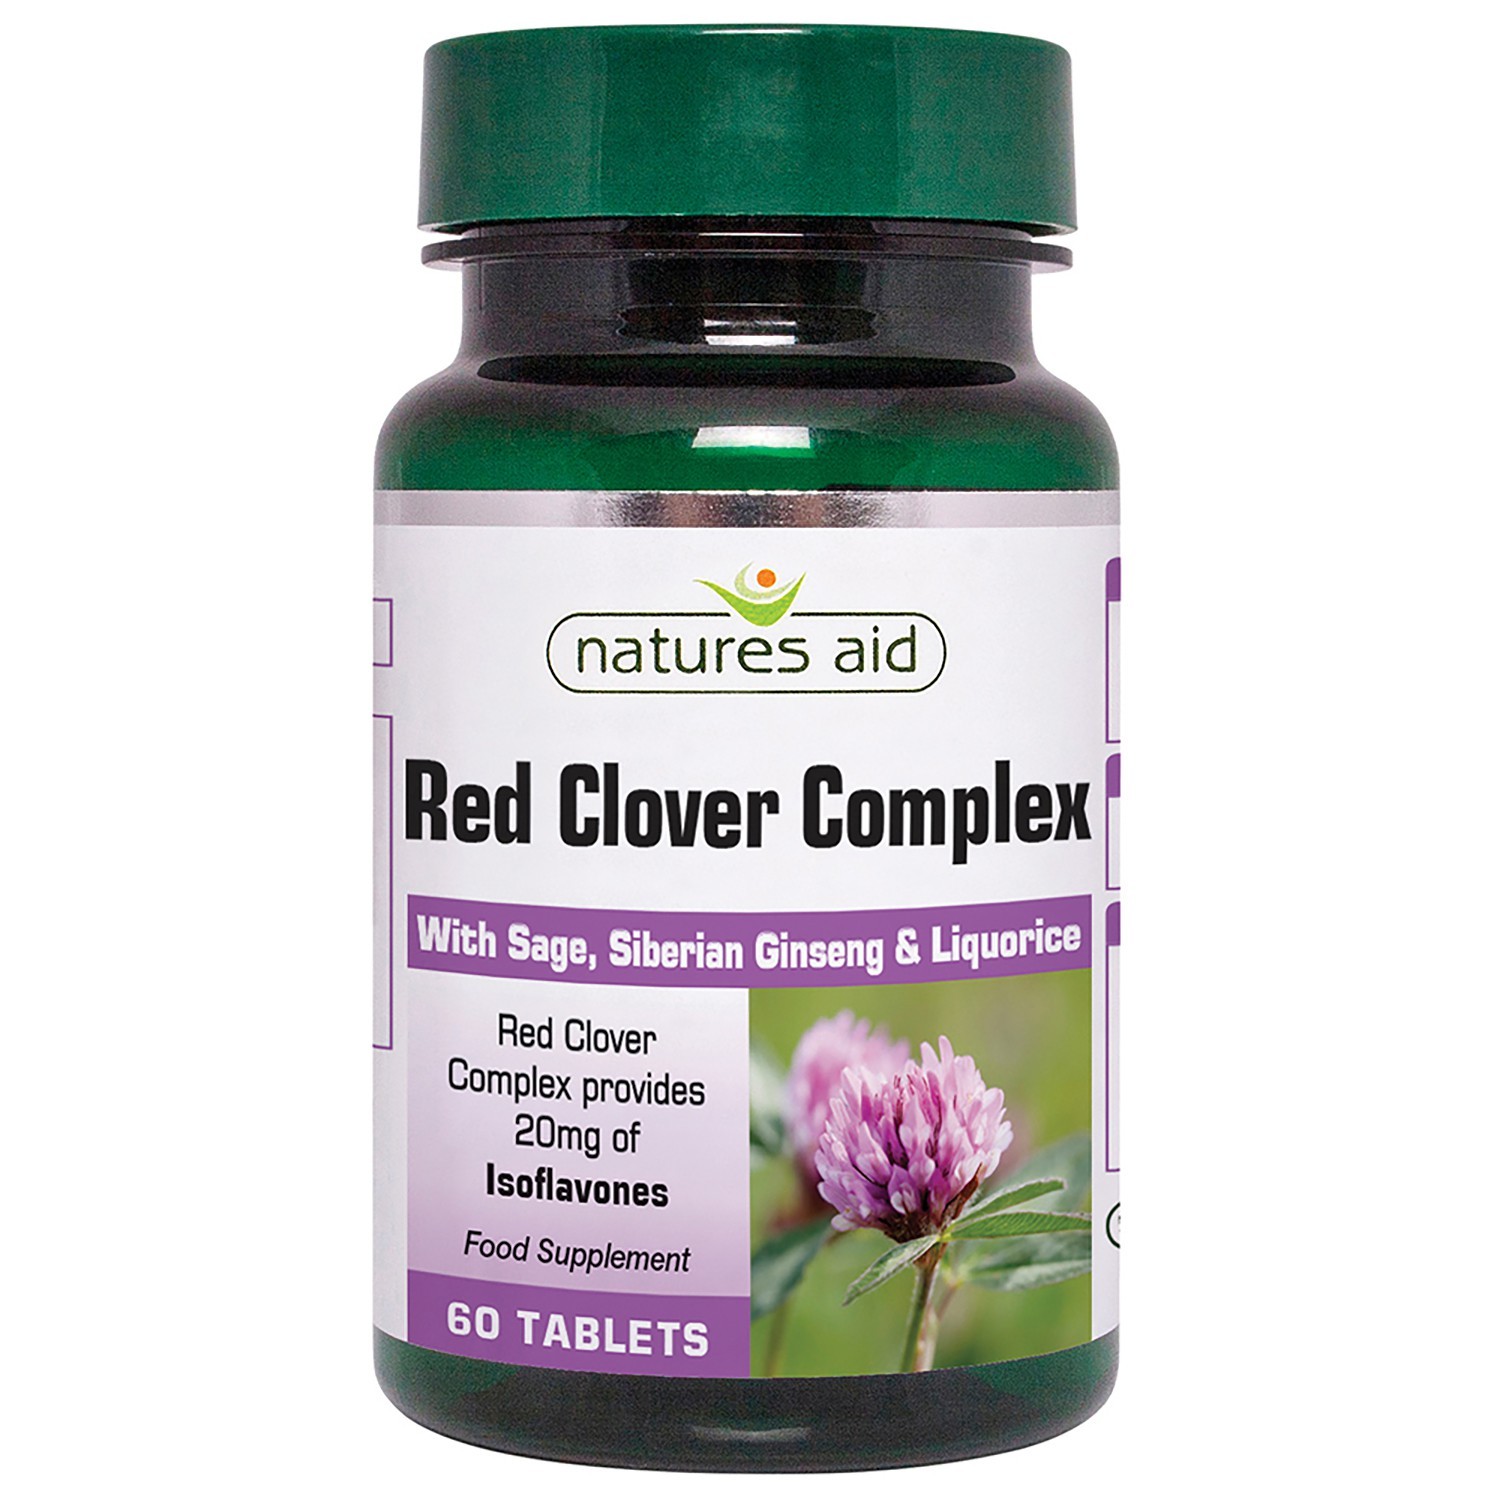 Natures Aid Red Clover Complex With Sage, Siberian Ginseng & Liquorice